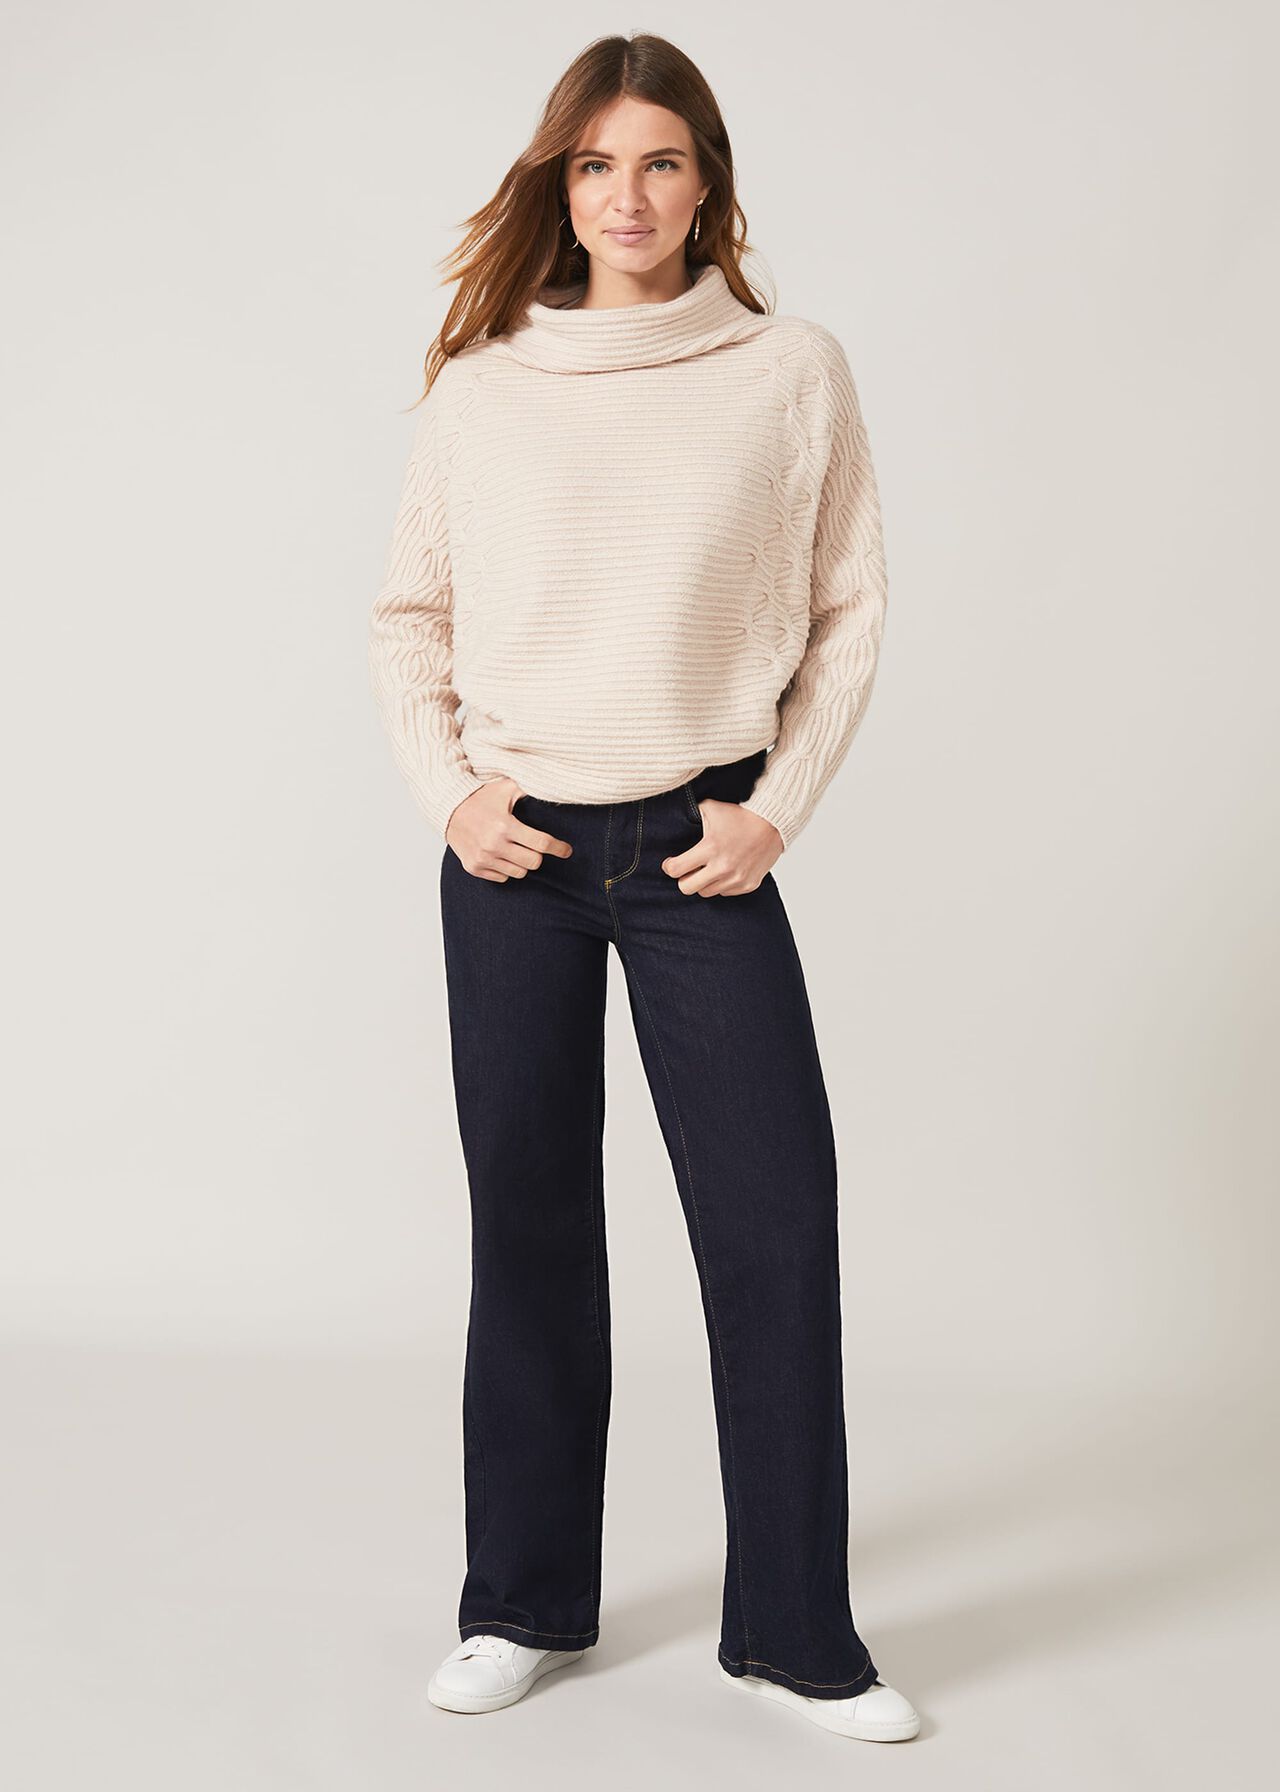 Cataleya Cable Knit Jumper